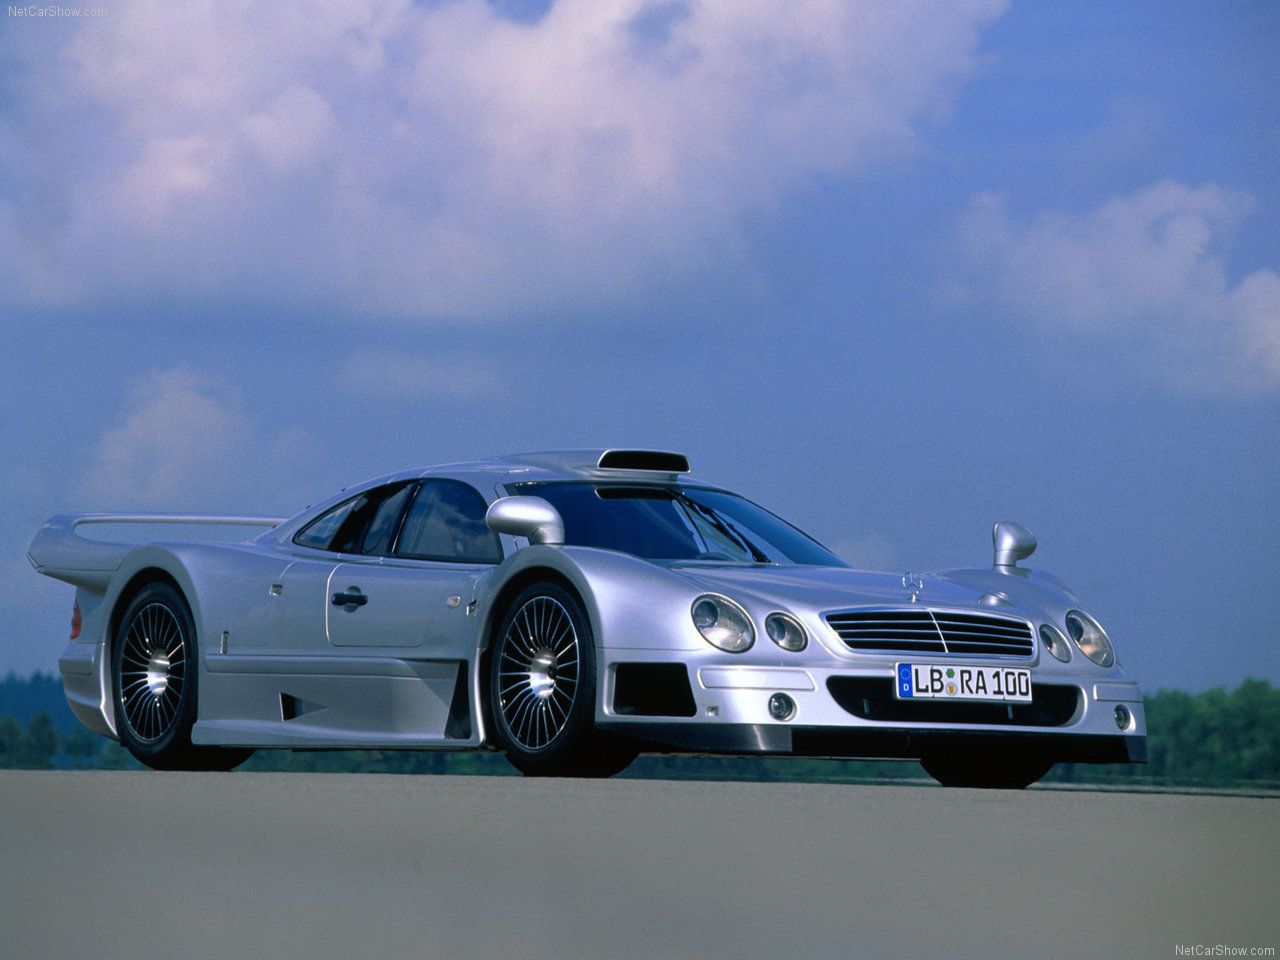 Mercedes-Benz CLK GTR at sunset, front and side view